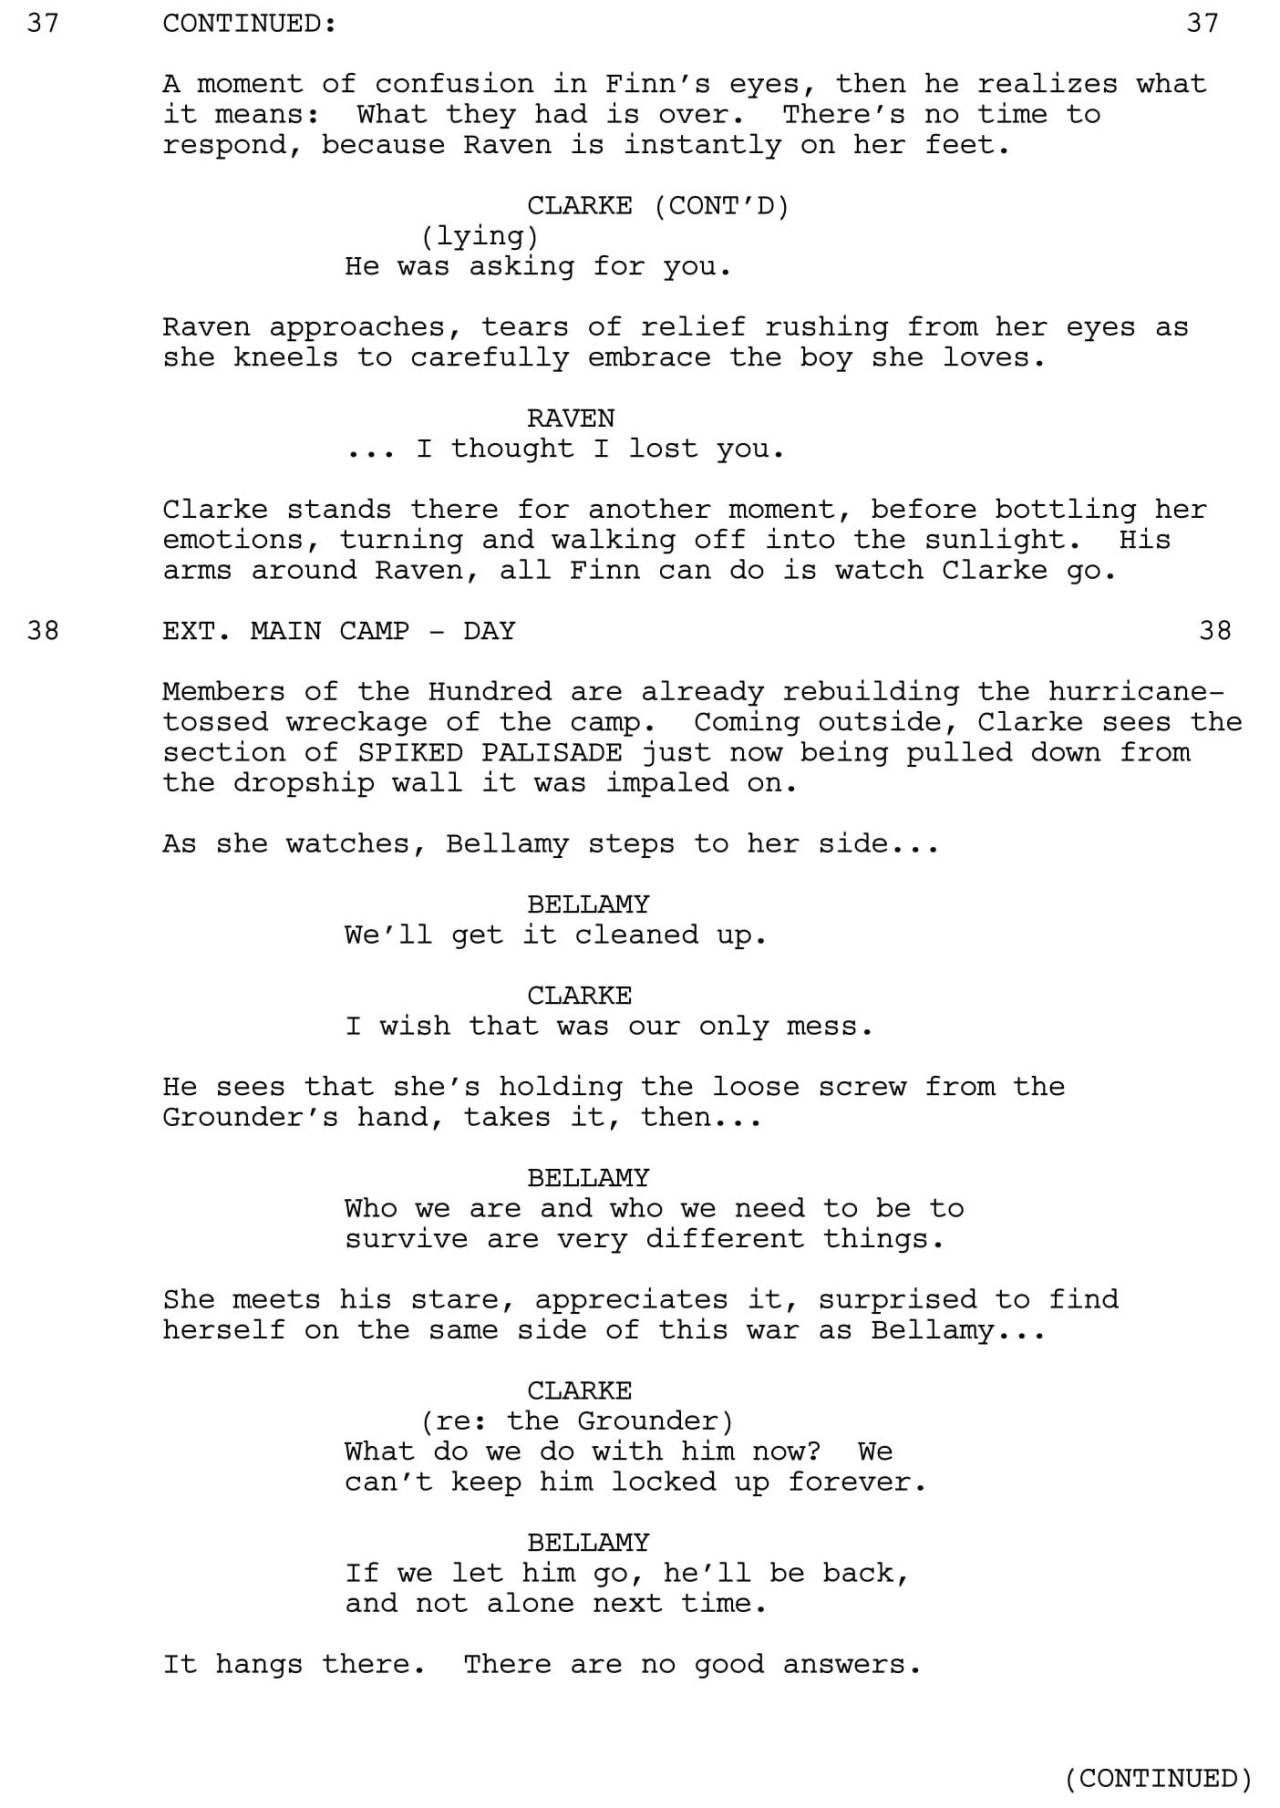 We’re back, bitches! Let’s start off this week’s script to screen with a scene